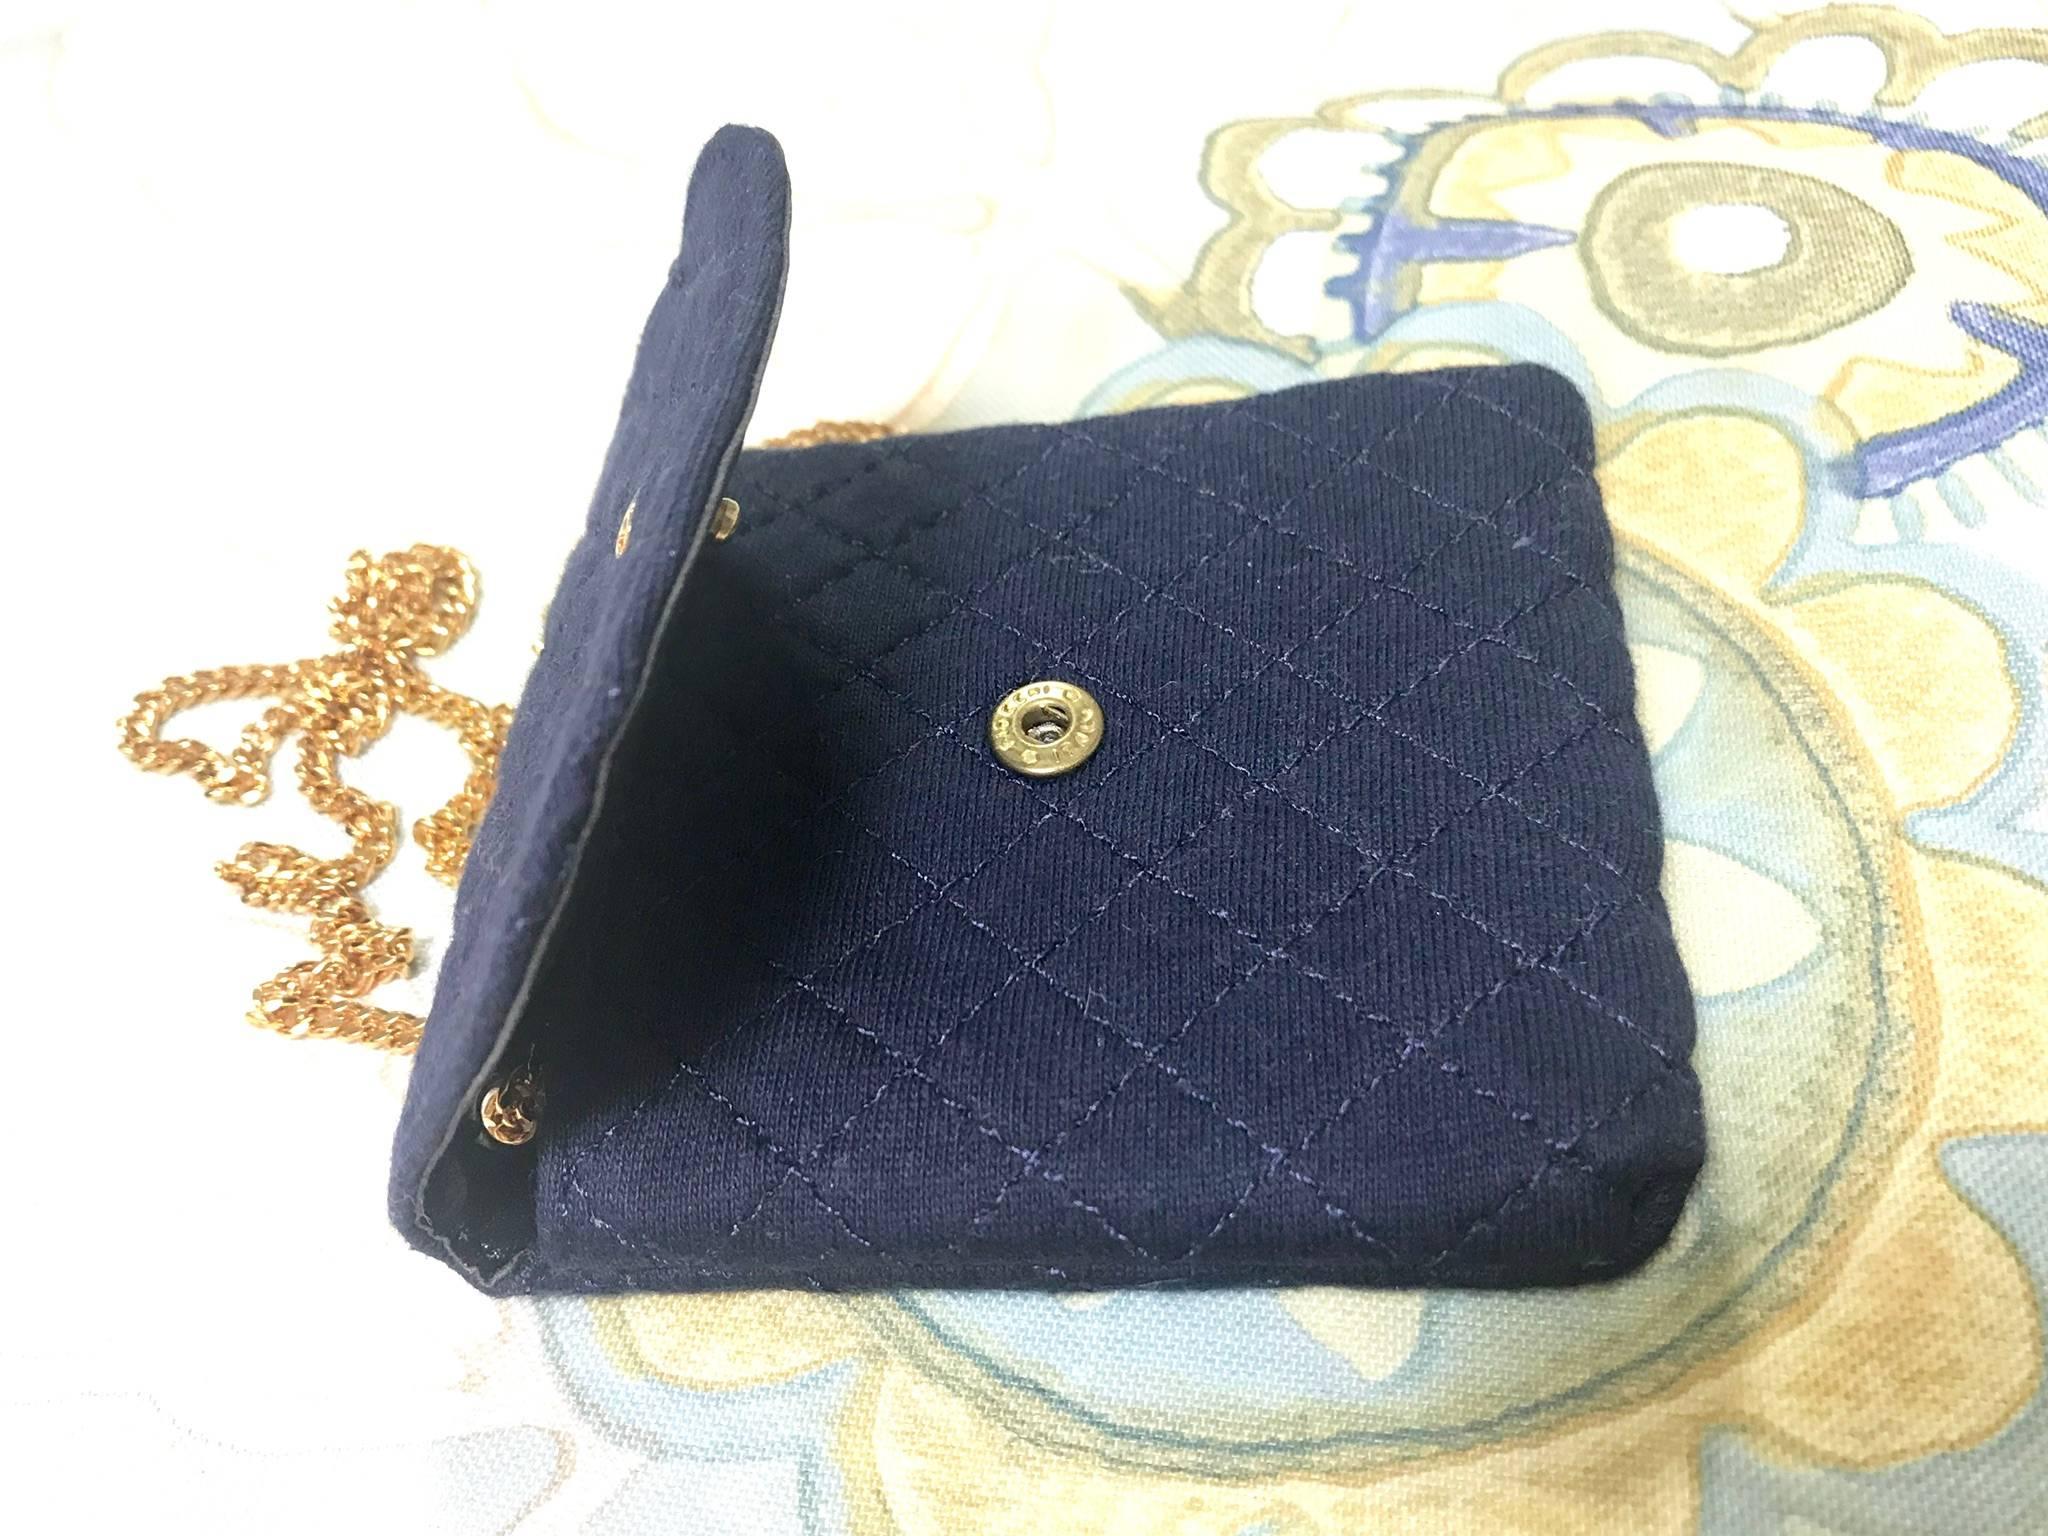 MINT. Vintage Chanel navy quilted jersey mini pouch, coin purse, long necklace. 3